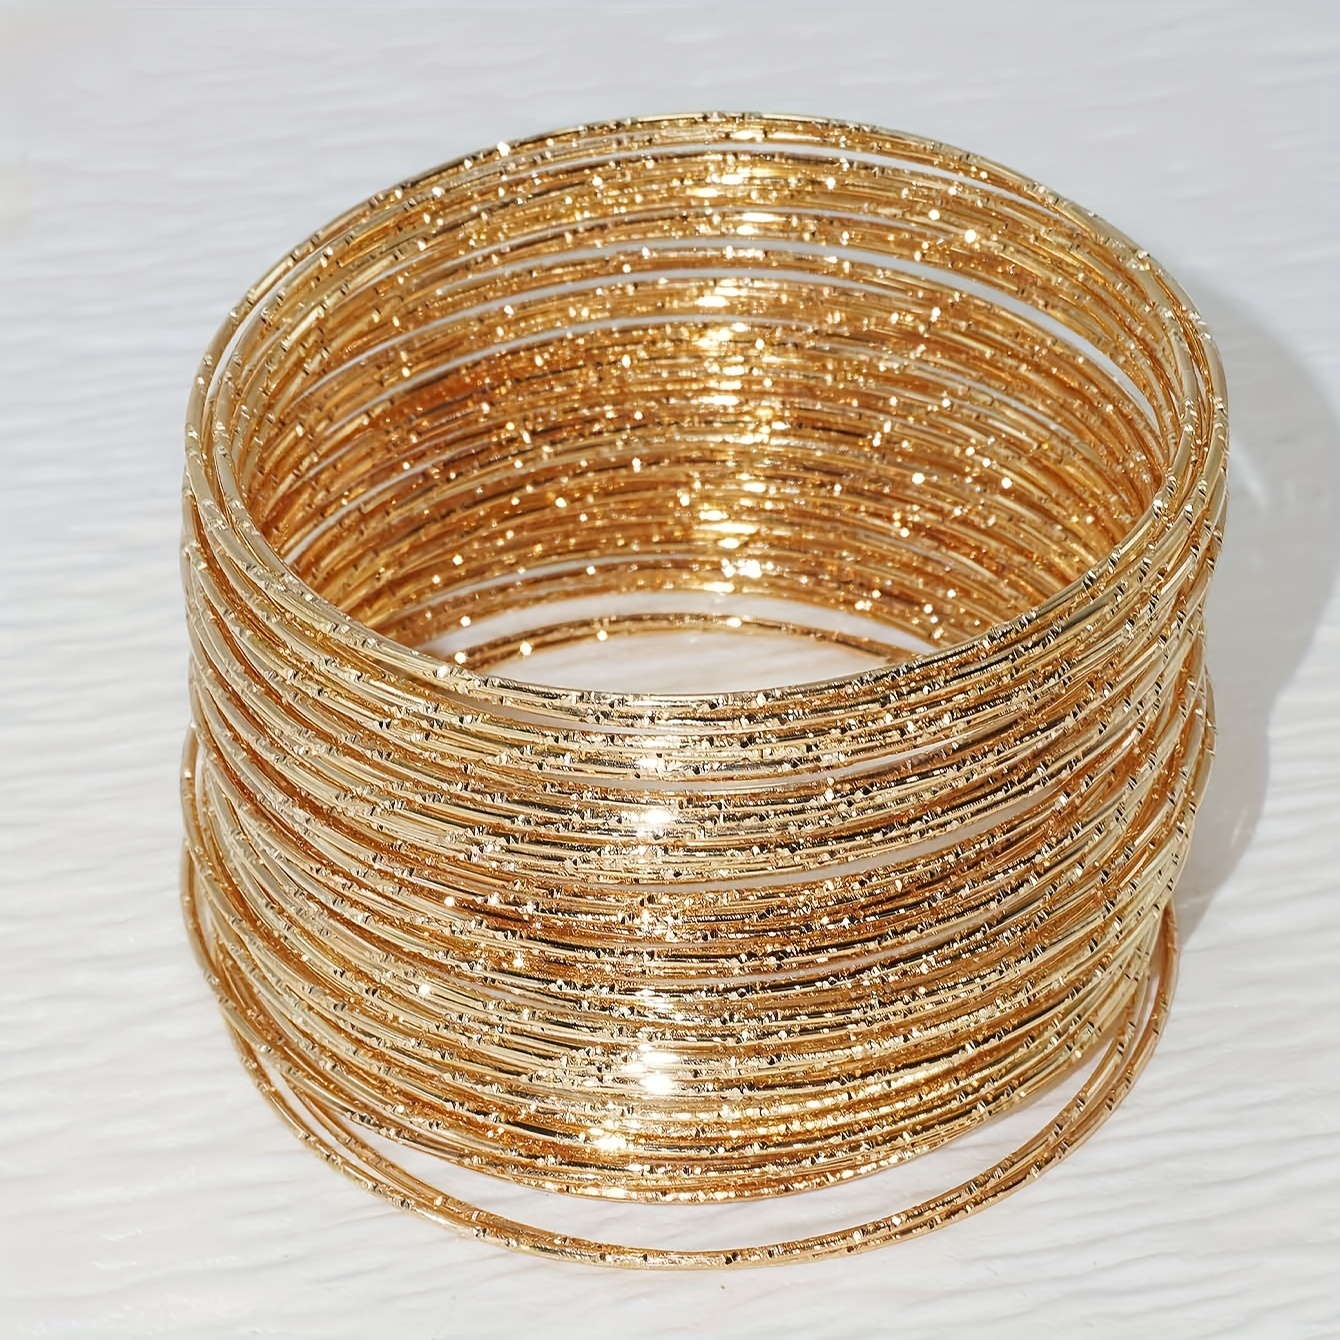 

60pcs/set Golden Color Round Circle Shiny Bangle Urban Fashion Hand Jewelry Decoration Gift For Her